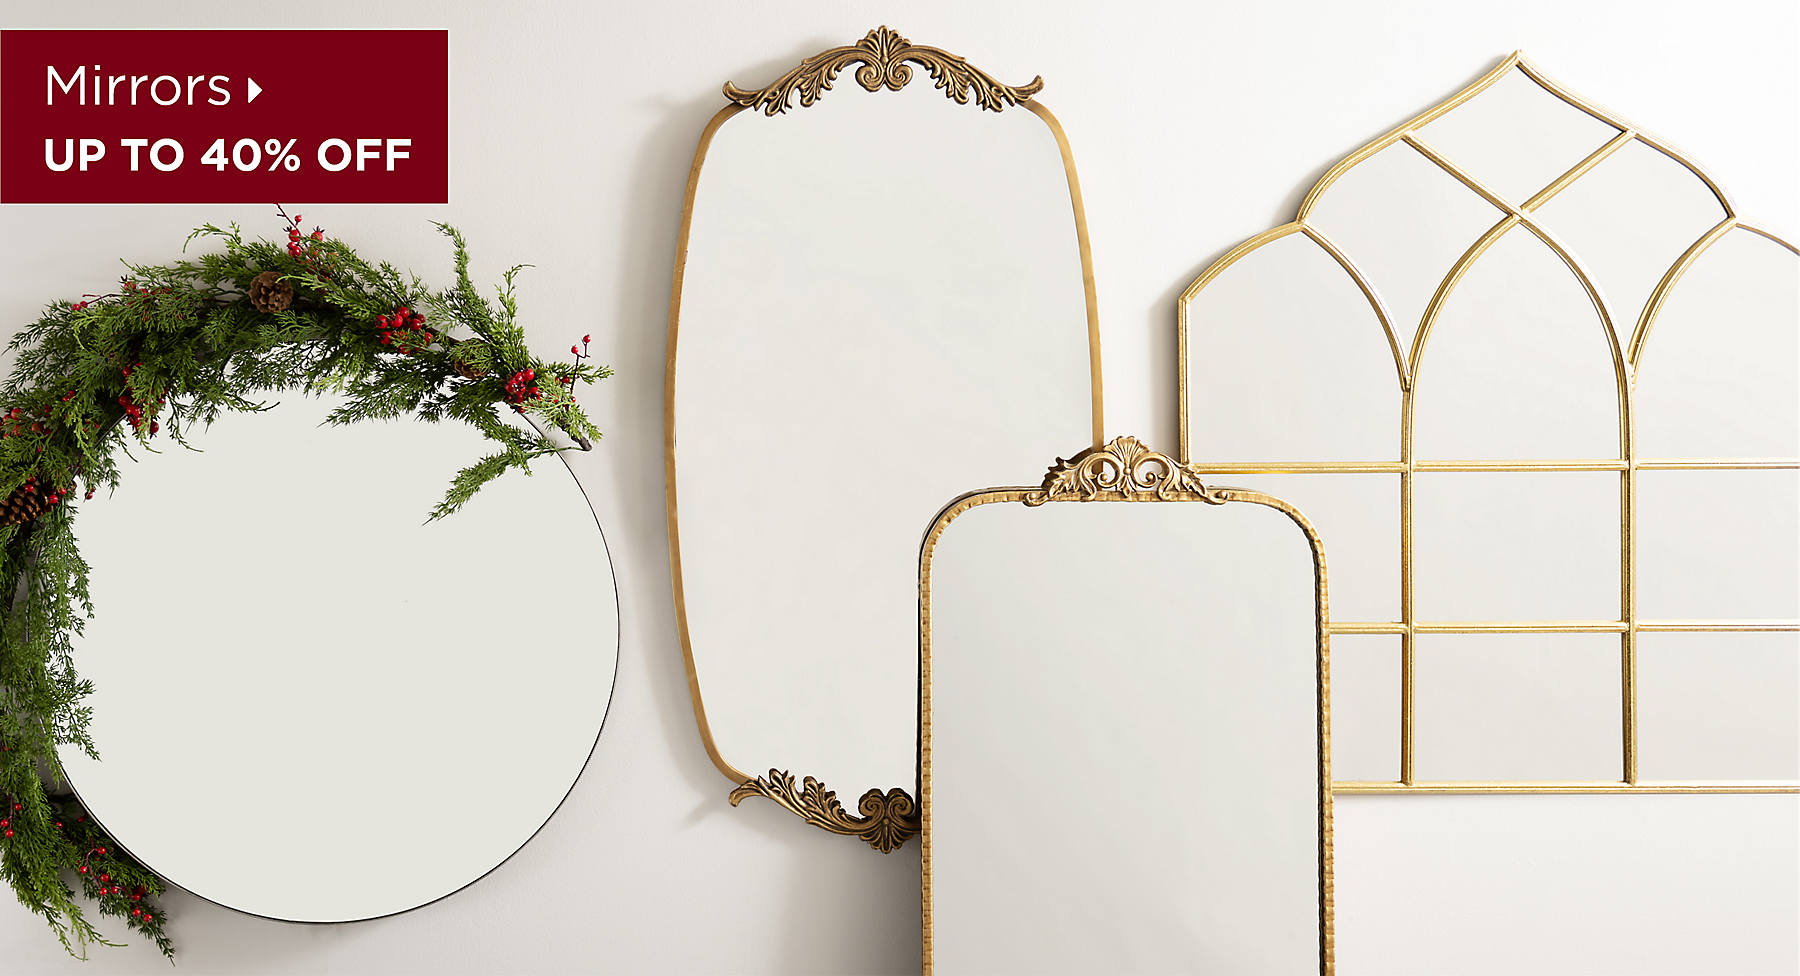 Mirrors Up to 40% off